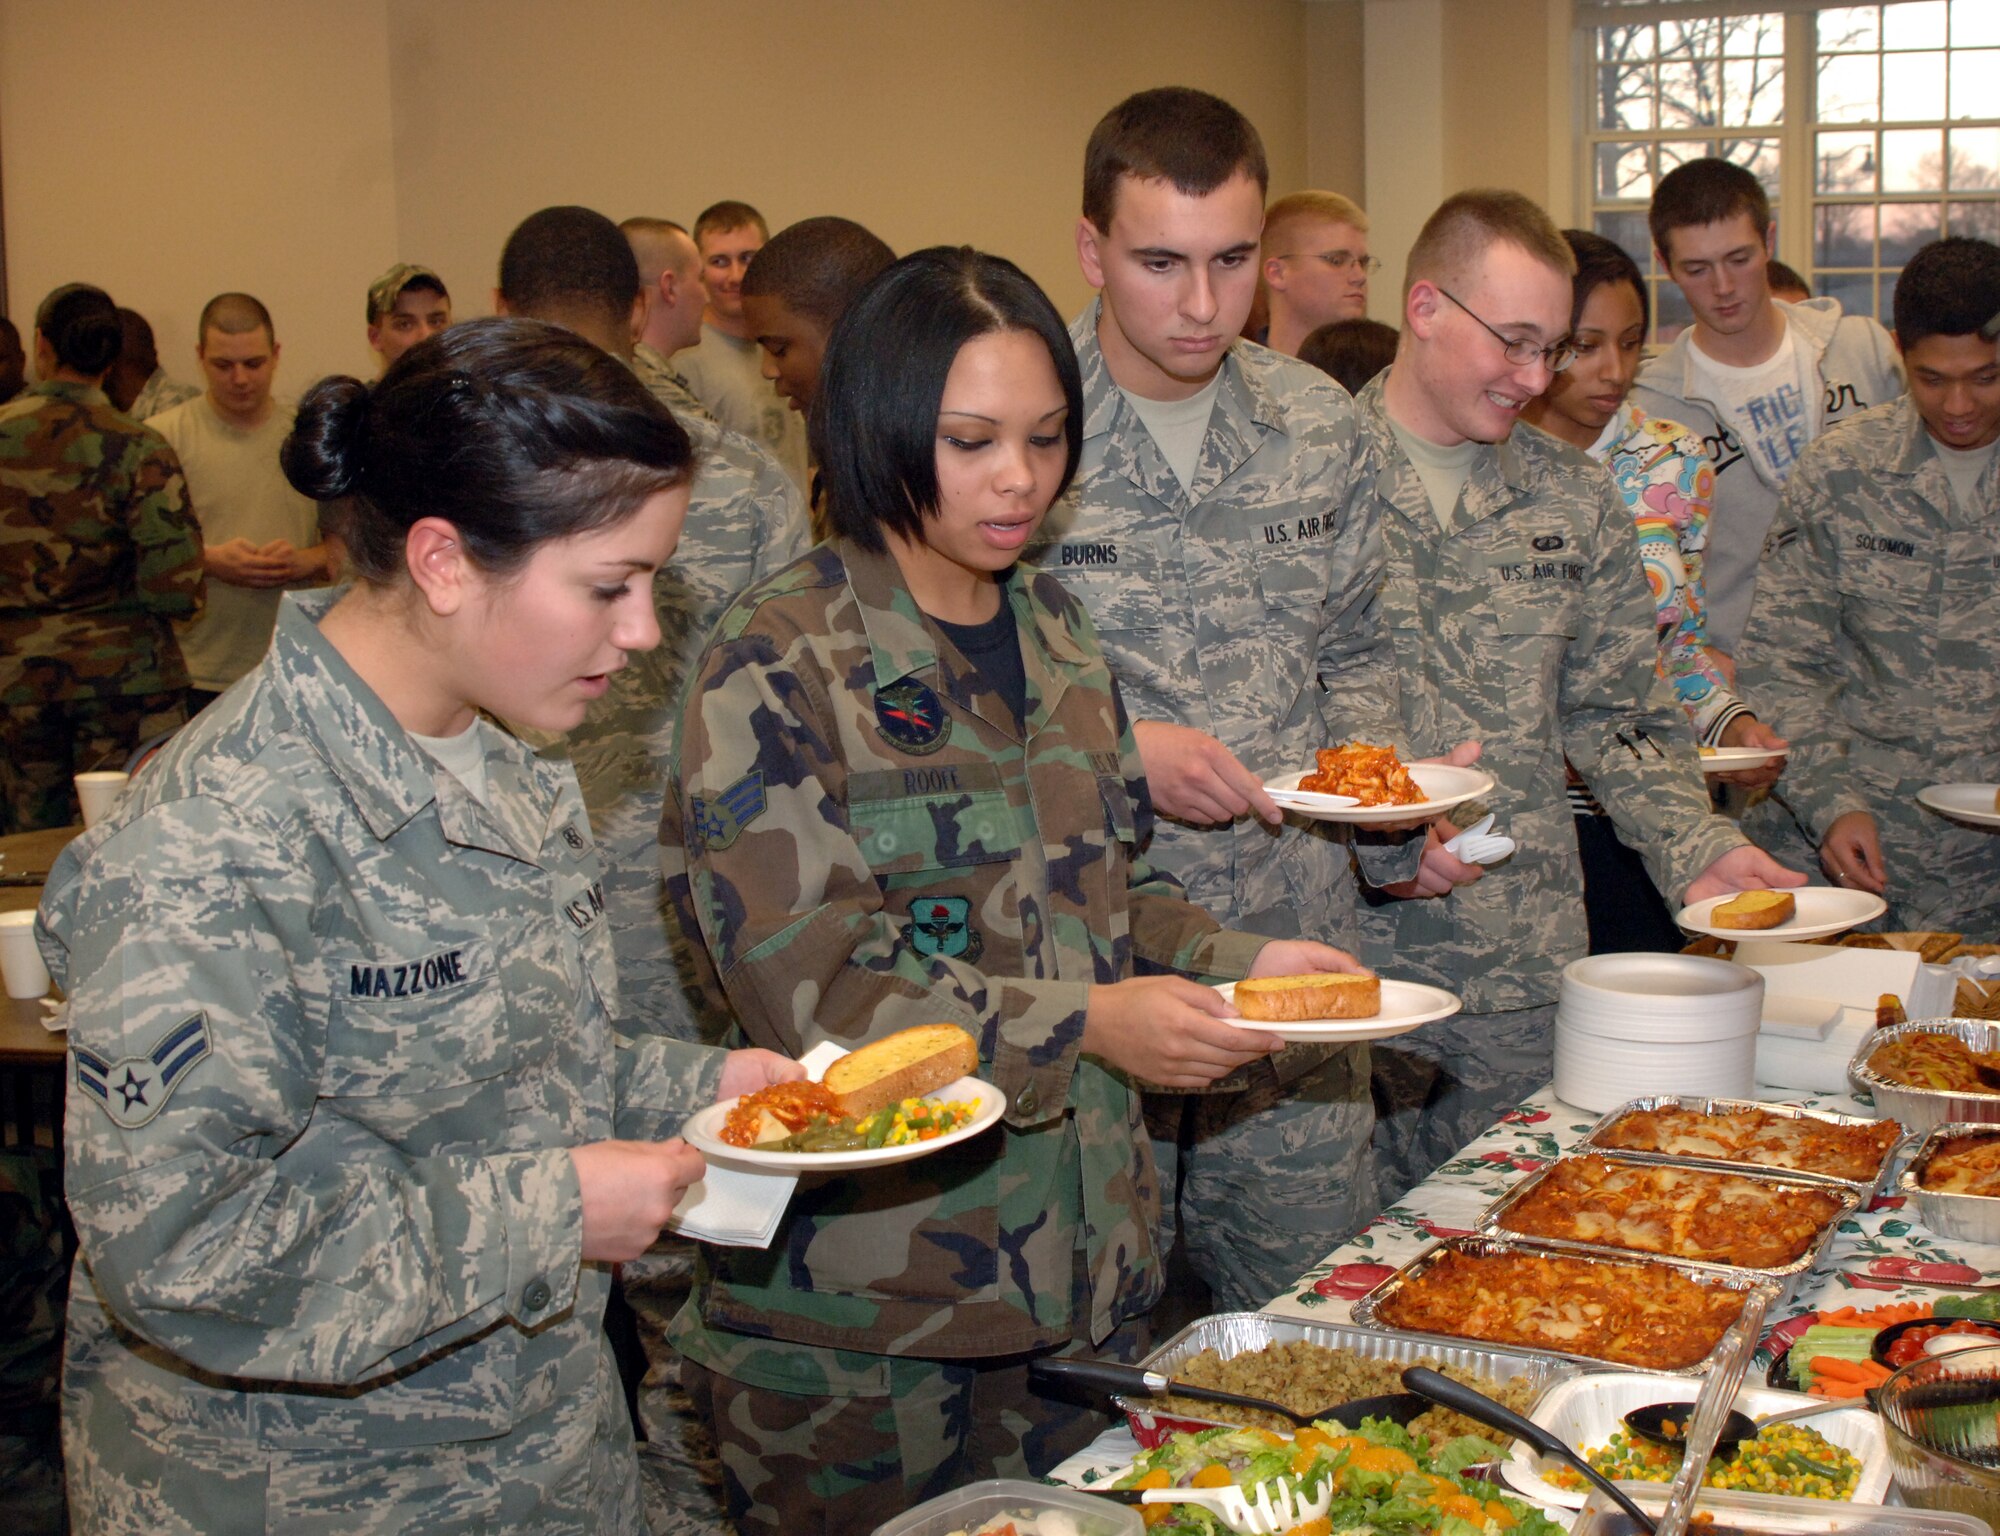 Enlisted dormitory residents browse through the buffet line at the Dorm Dinner held Jan. 22 at the Chapel Annex. This dinner was hosted by senior leaders of Columbus AFB. During the dinner, the new enlisted Dormitory Council held a vote to elect its new members. (U.S. Air Force photo by Airman 1st Class Josh Harbin)